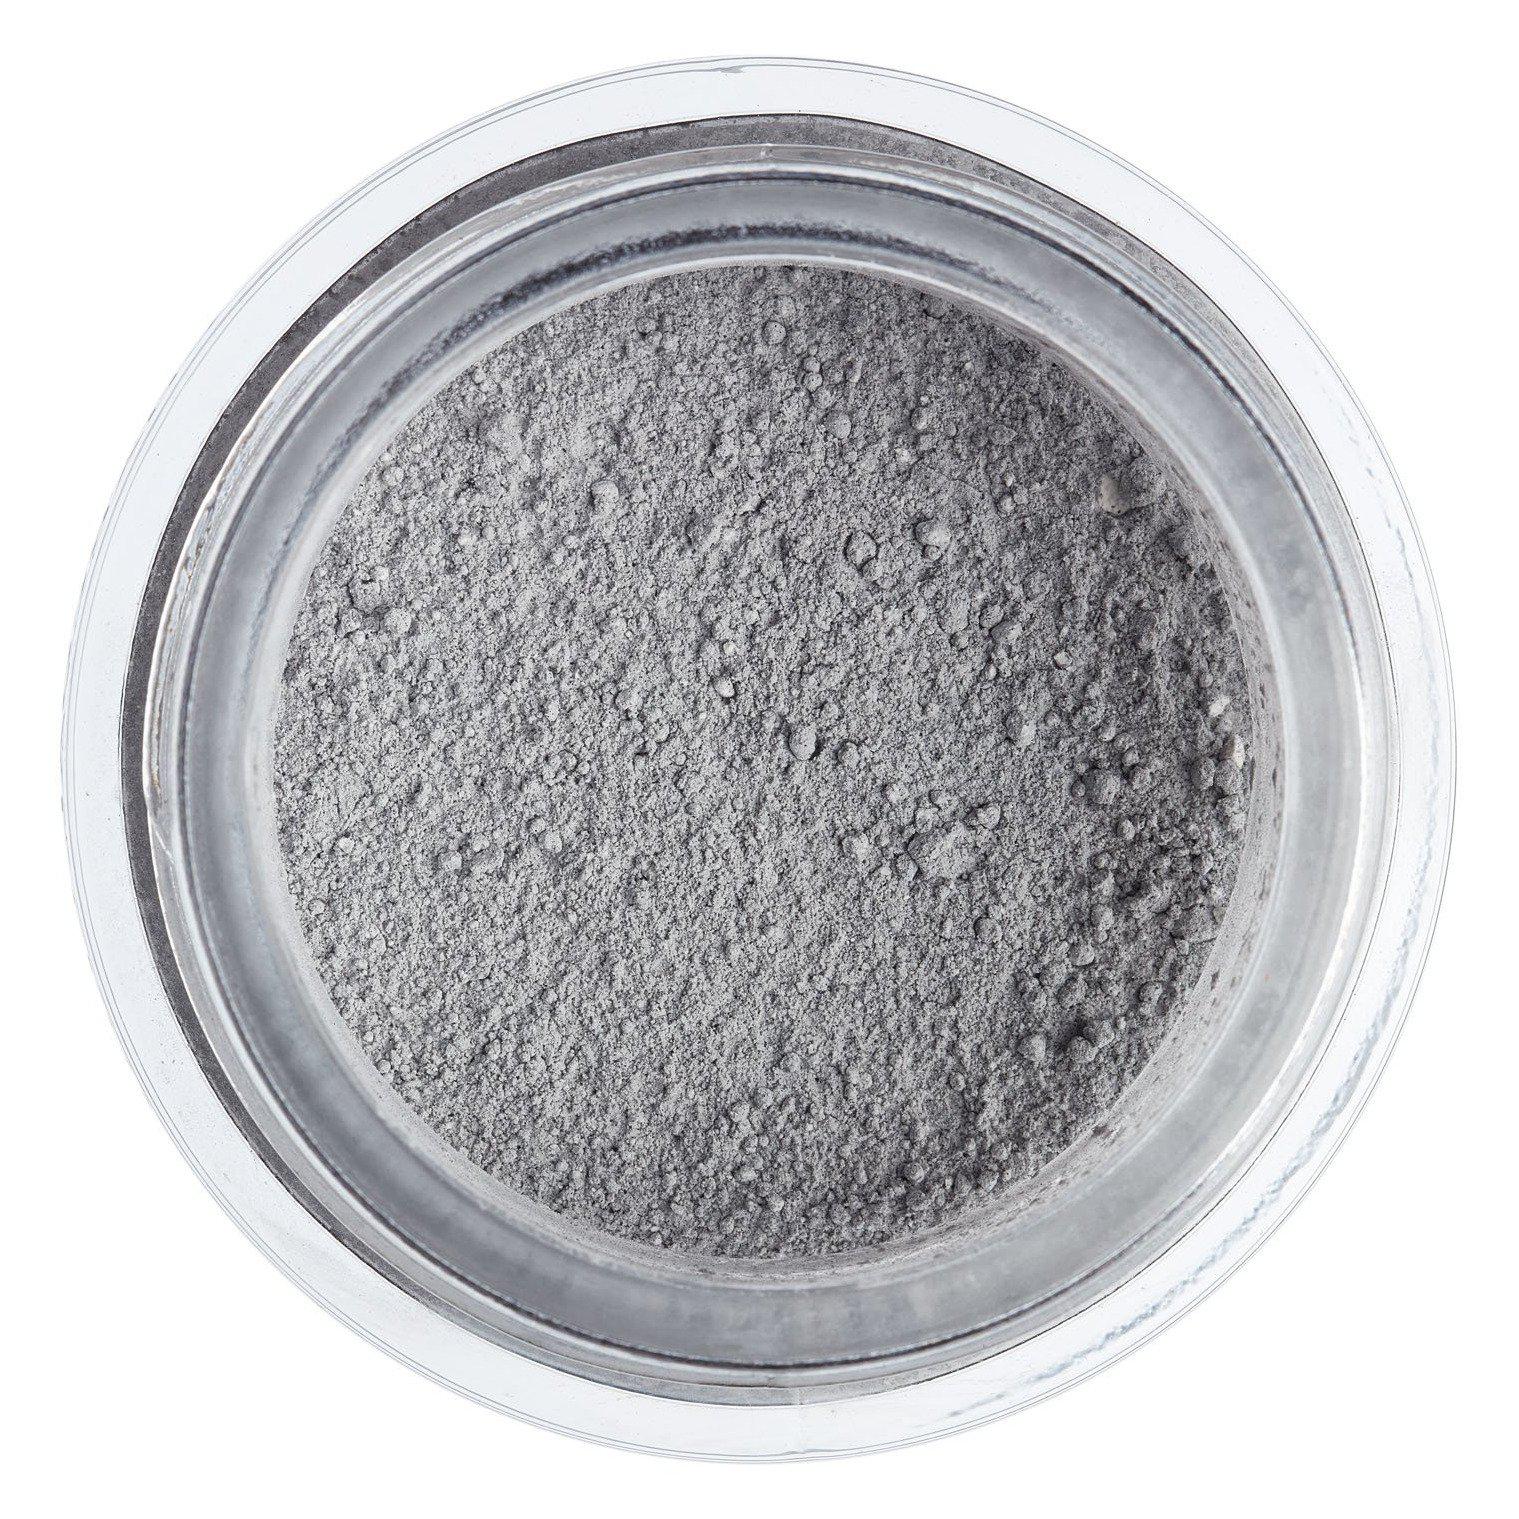 Activated Charcoal Clay Mask - 120ml-Beauty & Well-Being-Summer Salt Body-The Bay Room